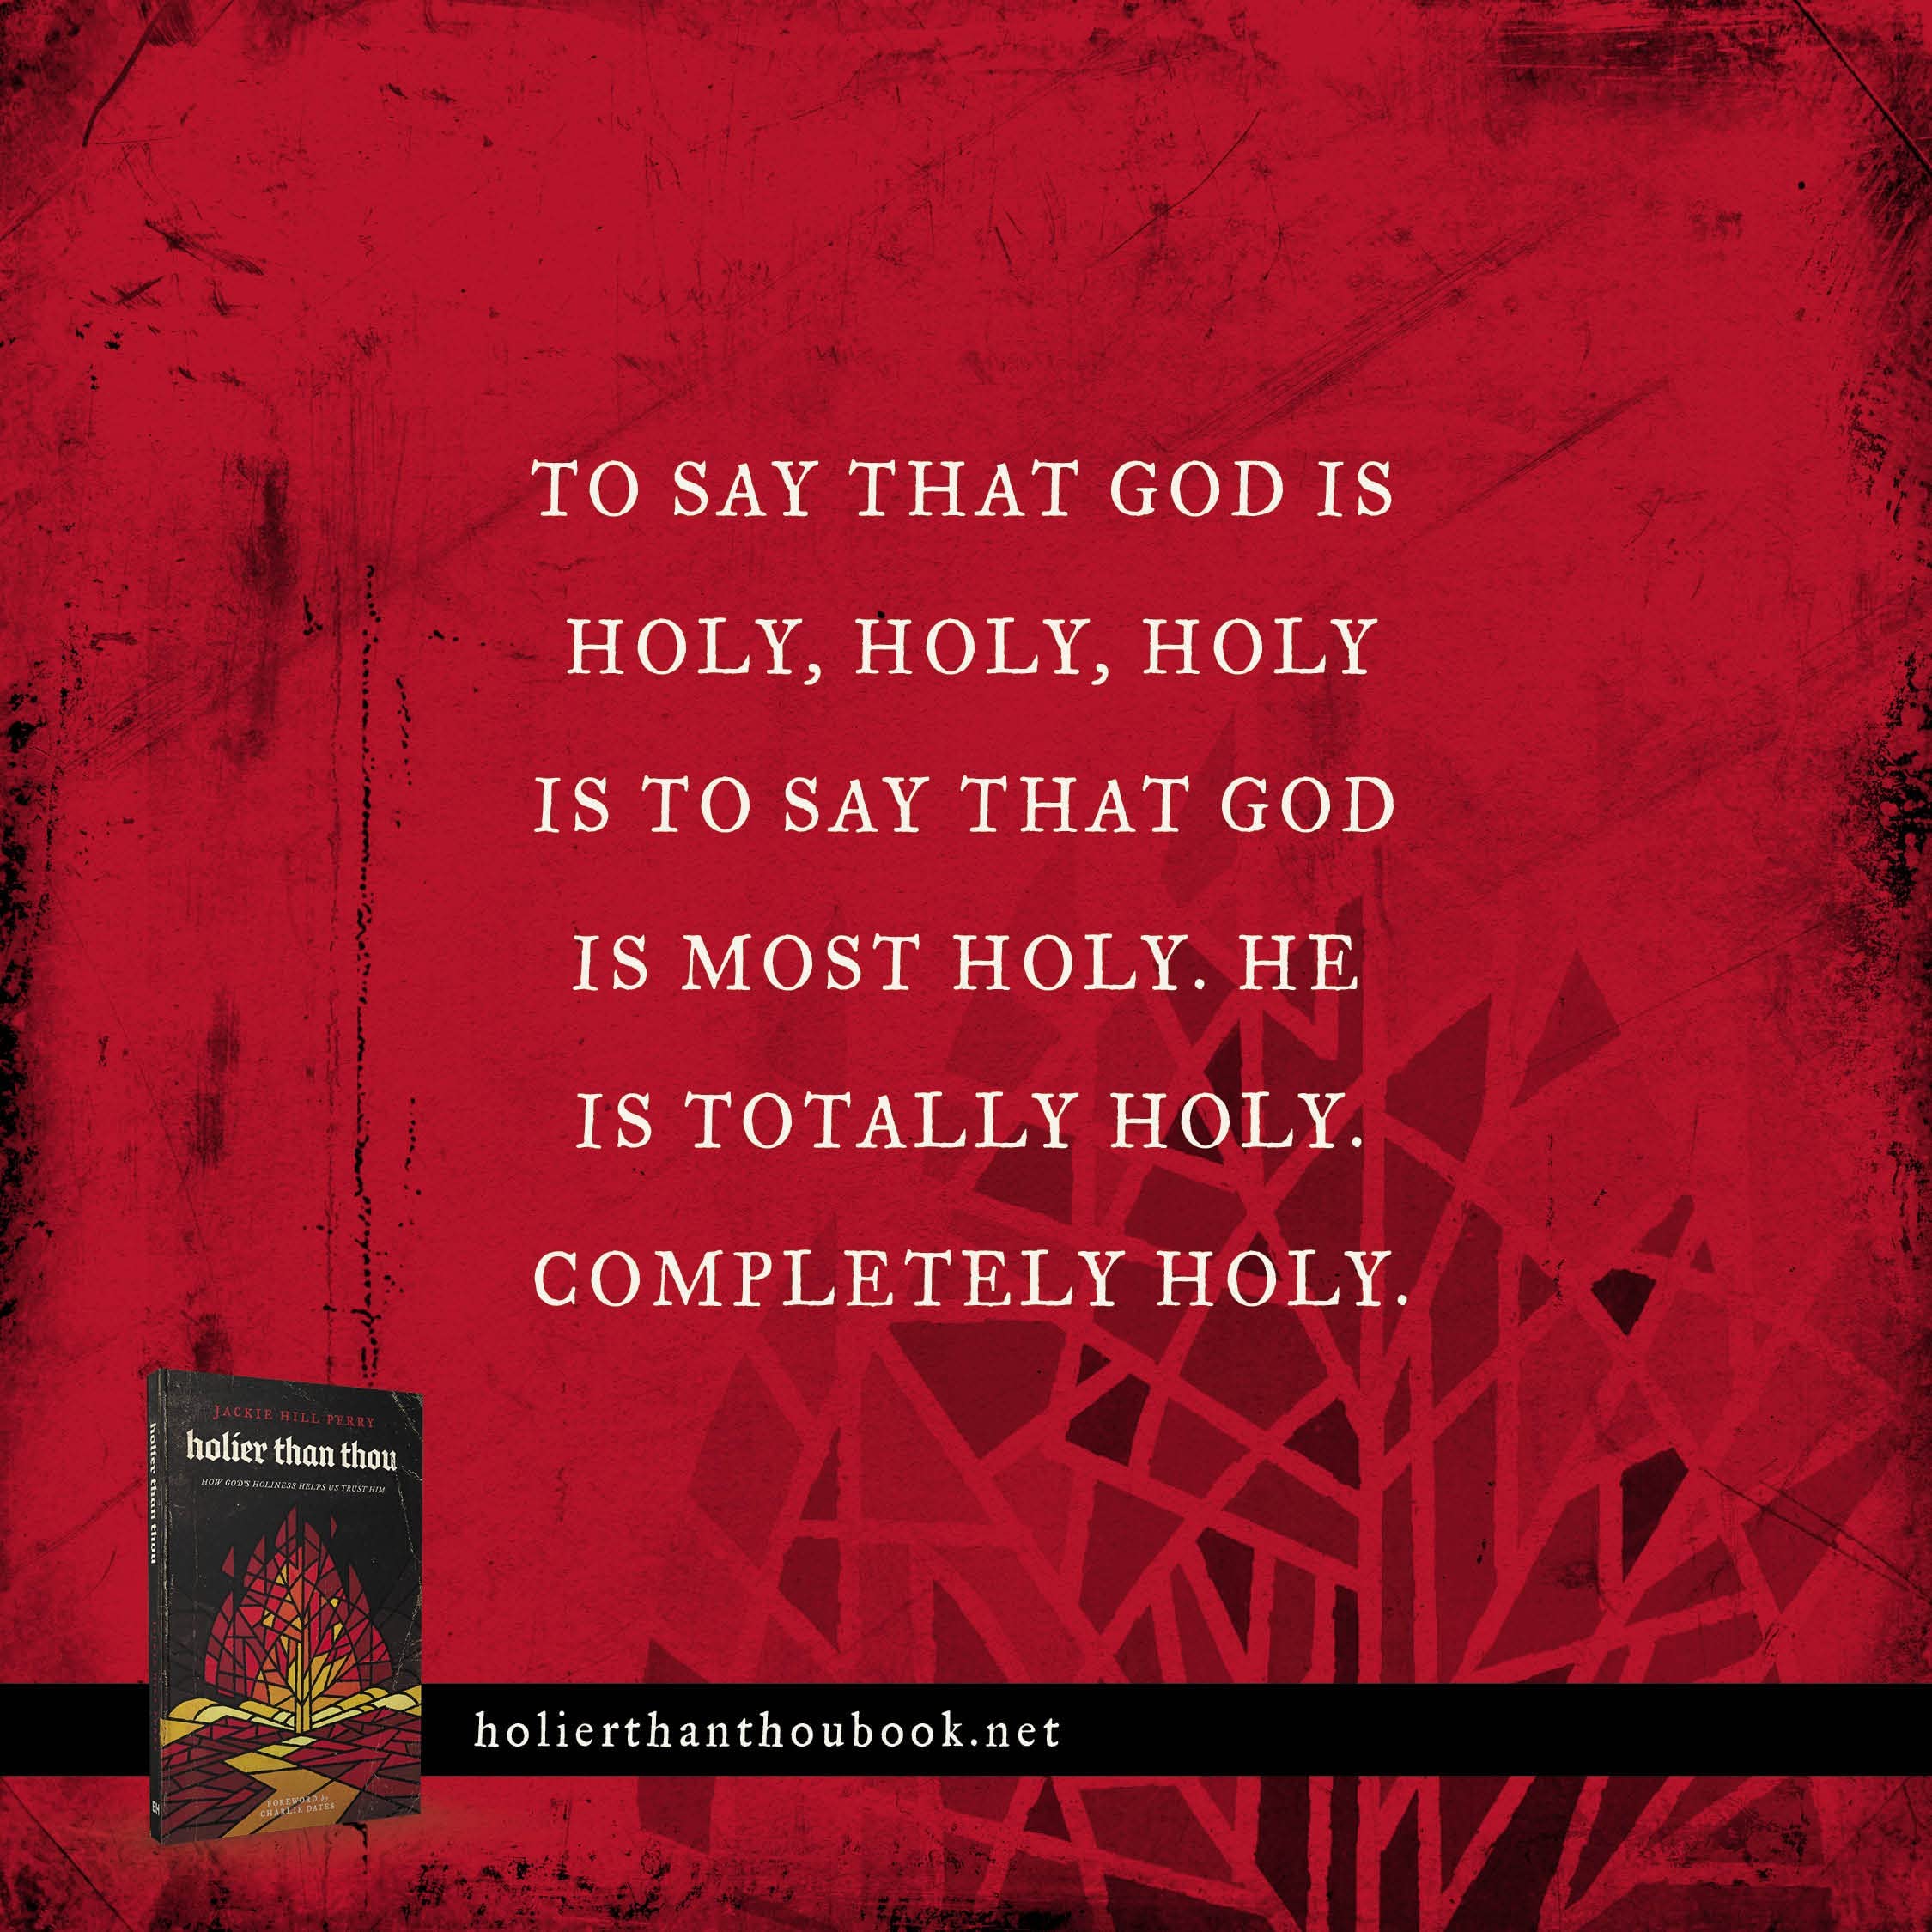 Holier Than Thou: How God’s Holiness Helps Us Trust Him